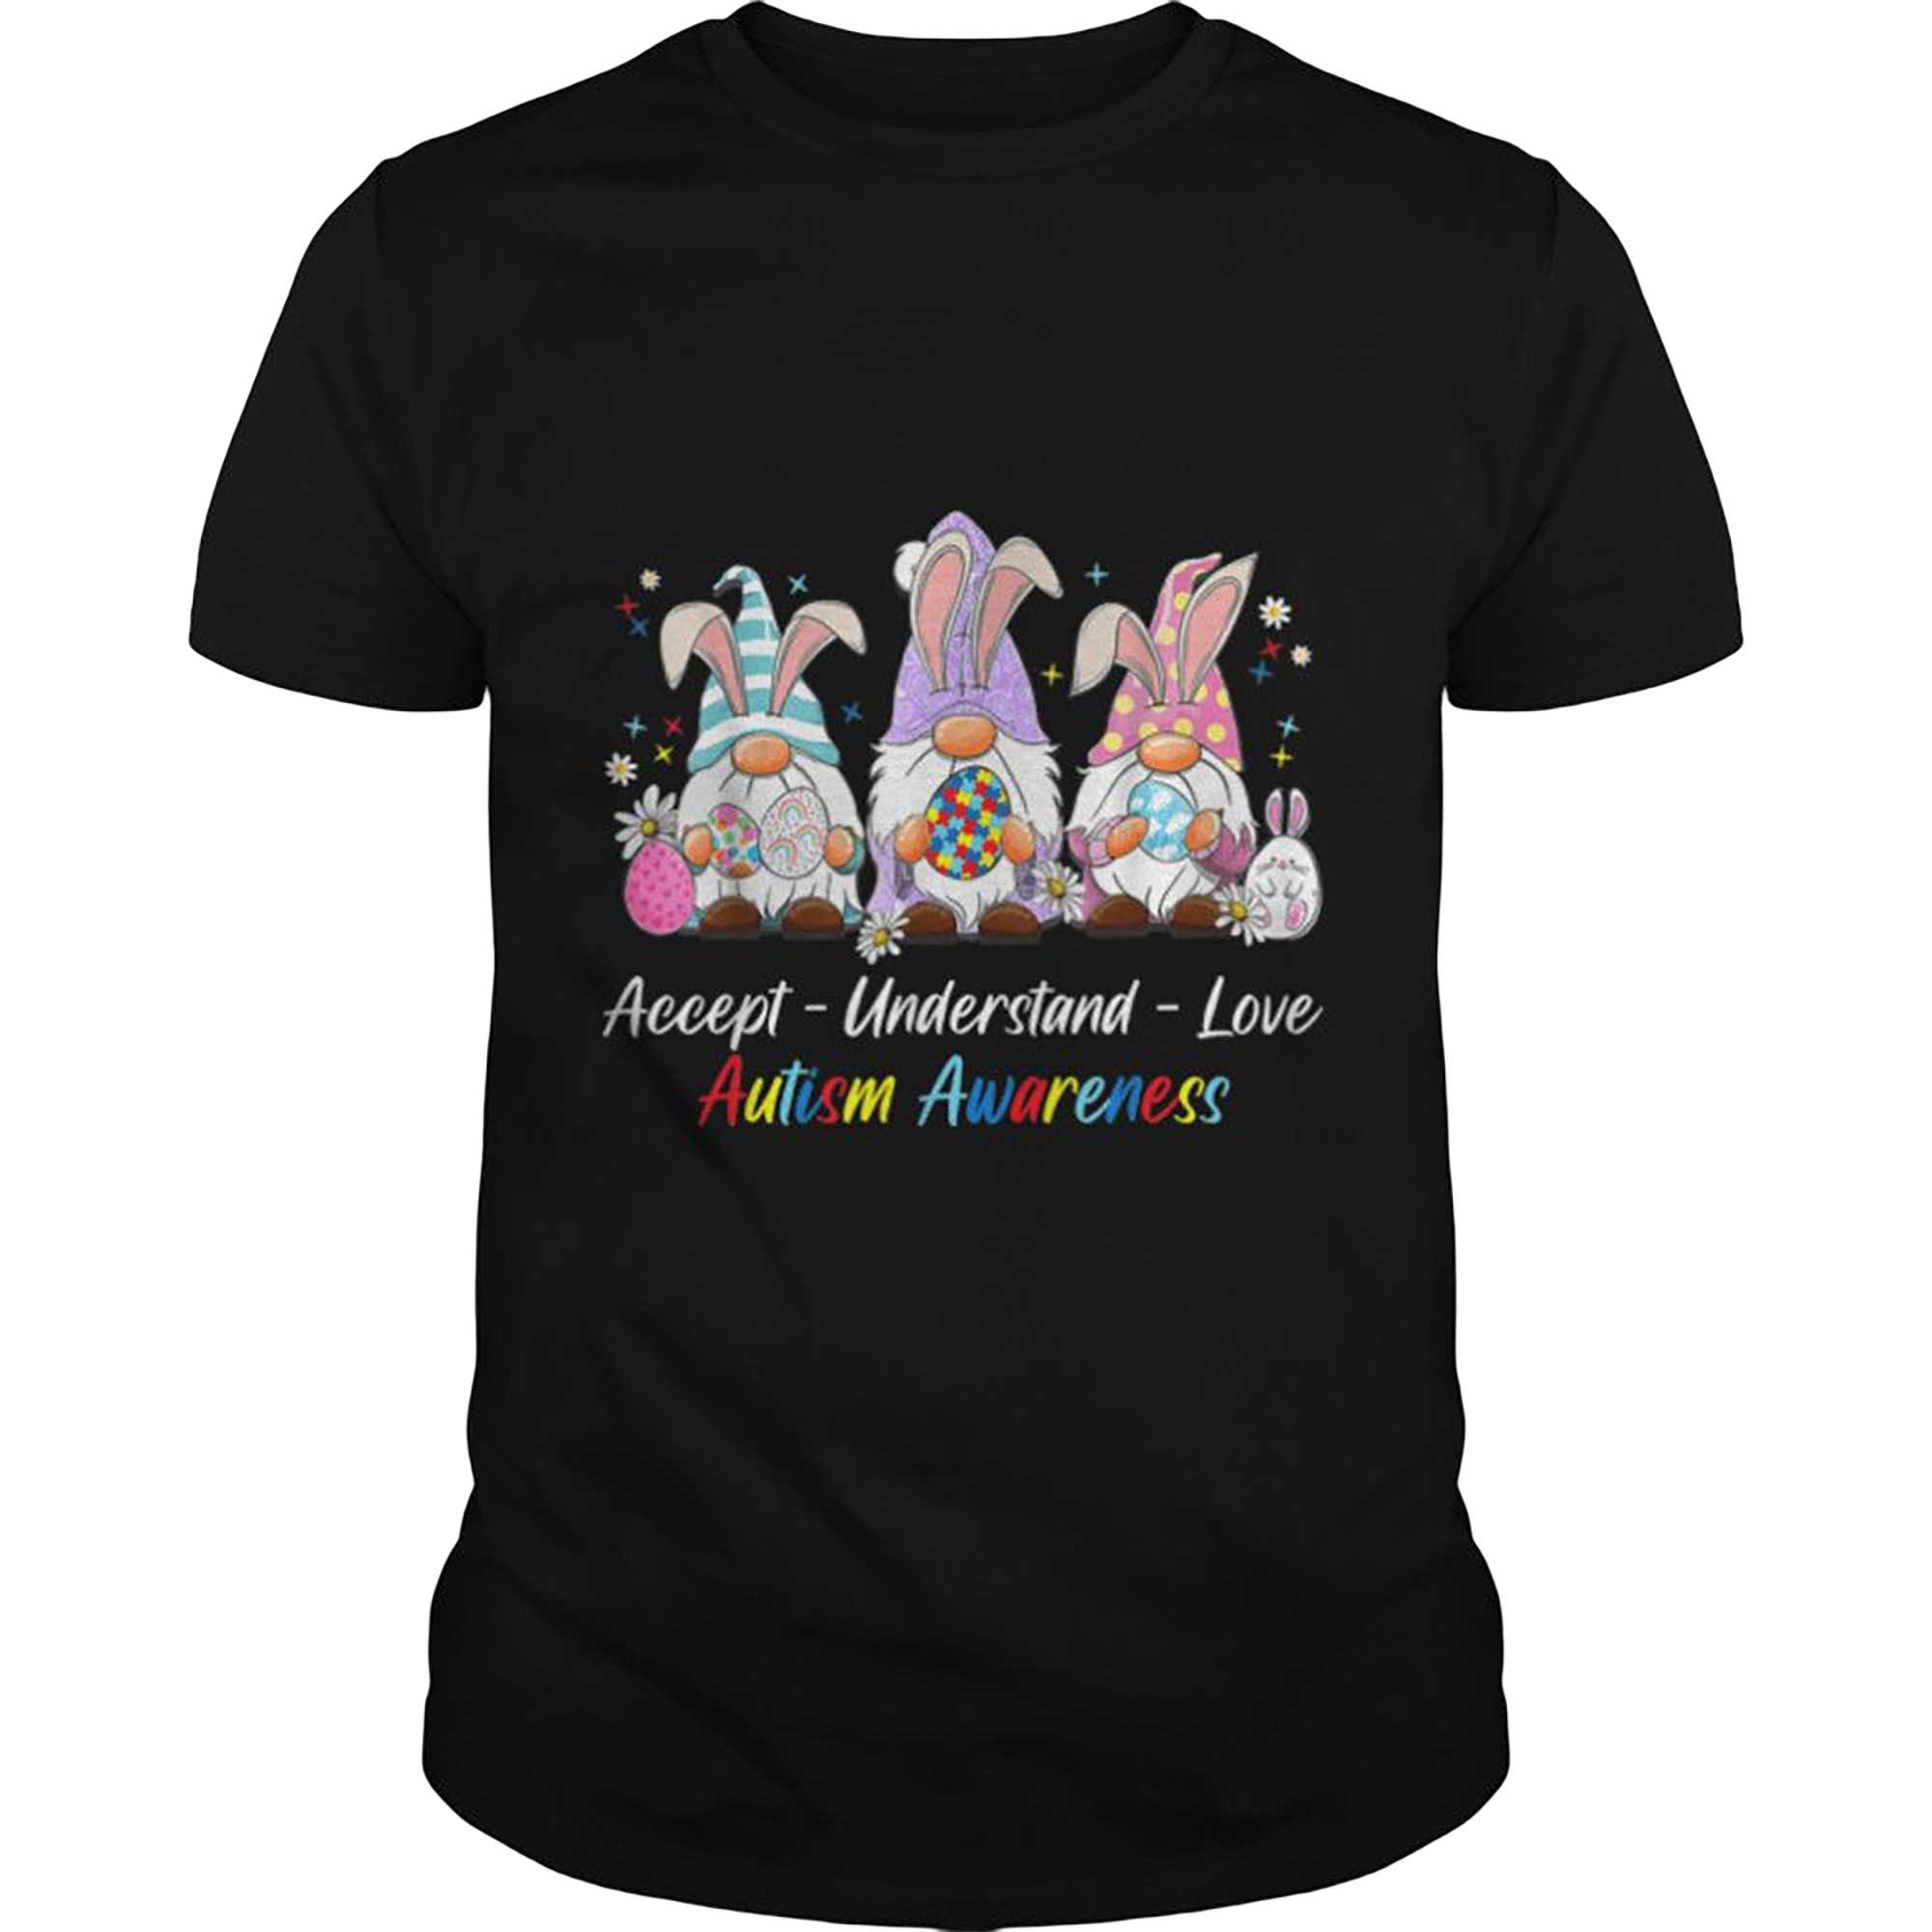 Skitongift-Accept-Understand-Love-Gnomes-Autism-Awareness-Easter-T-Shirt-Funny-Shirts-Hoodie-Sweater-Short-Sleeve-Casual-Shirt